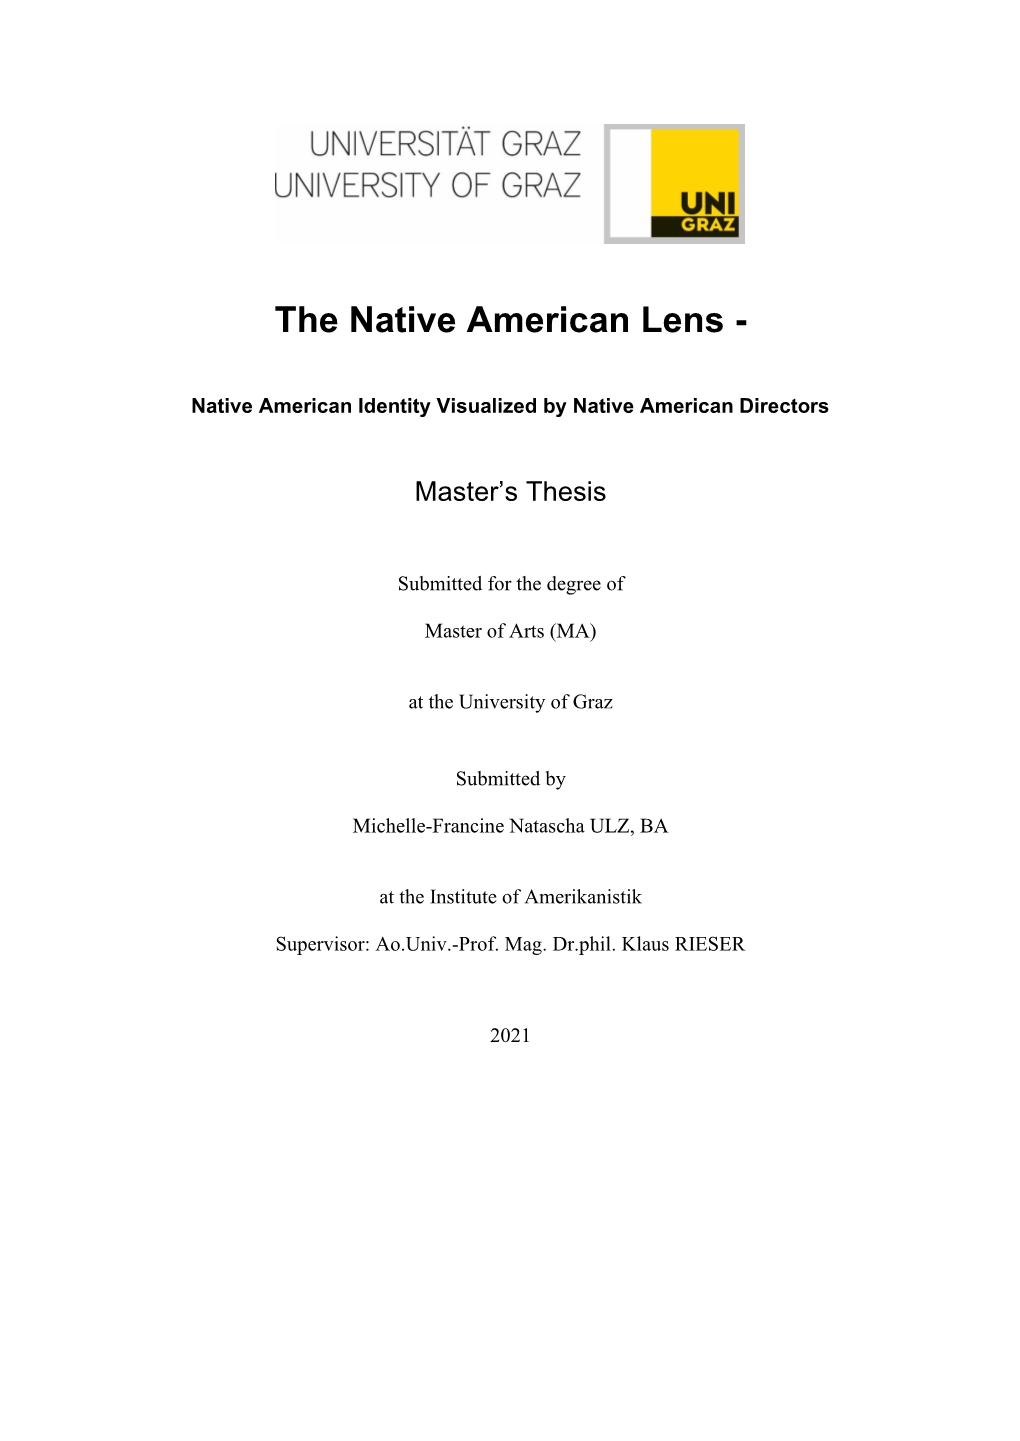 The Native American Lens